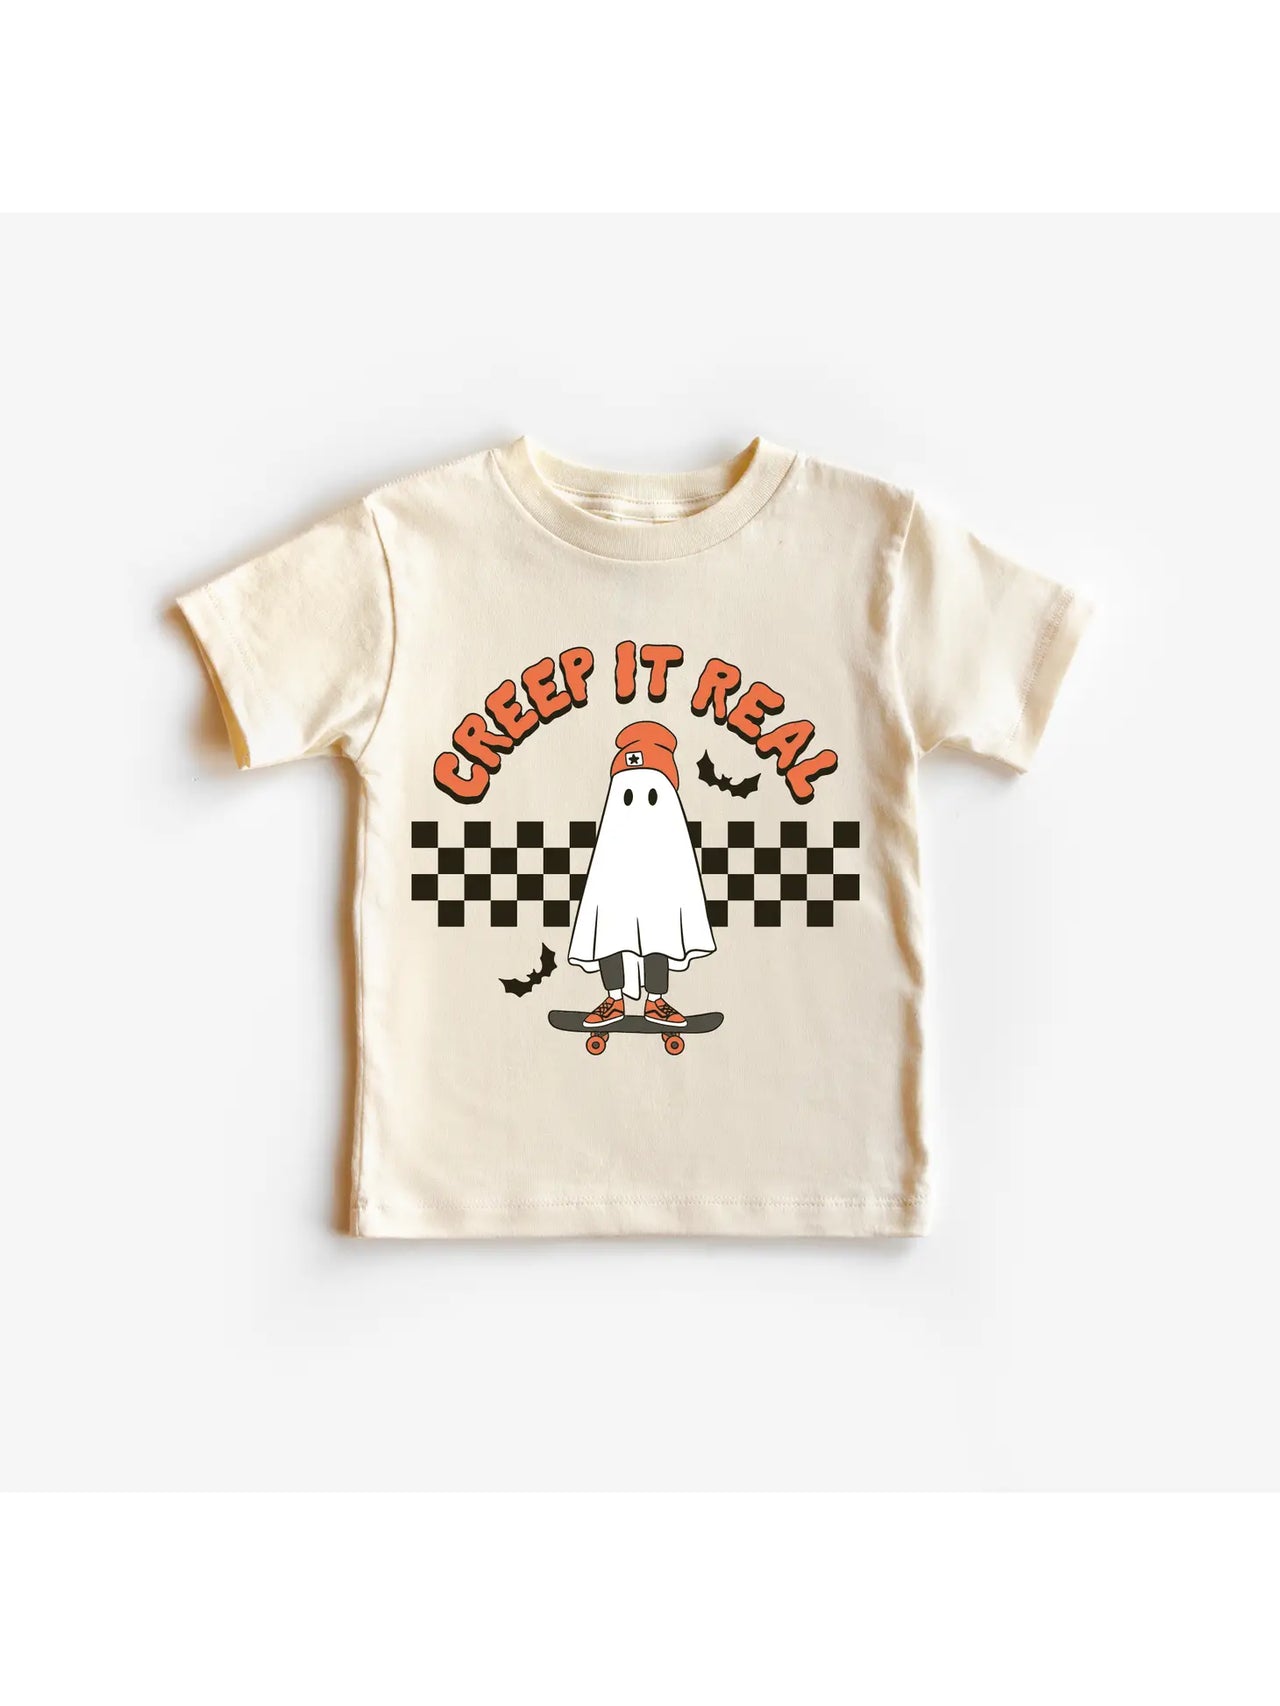 Toddler and Youth T-Shirt || Creep it Real